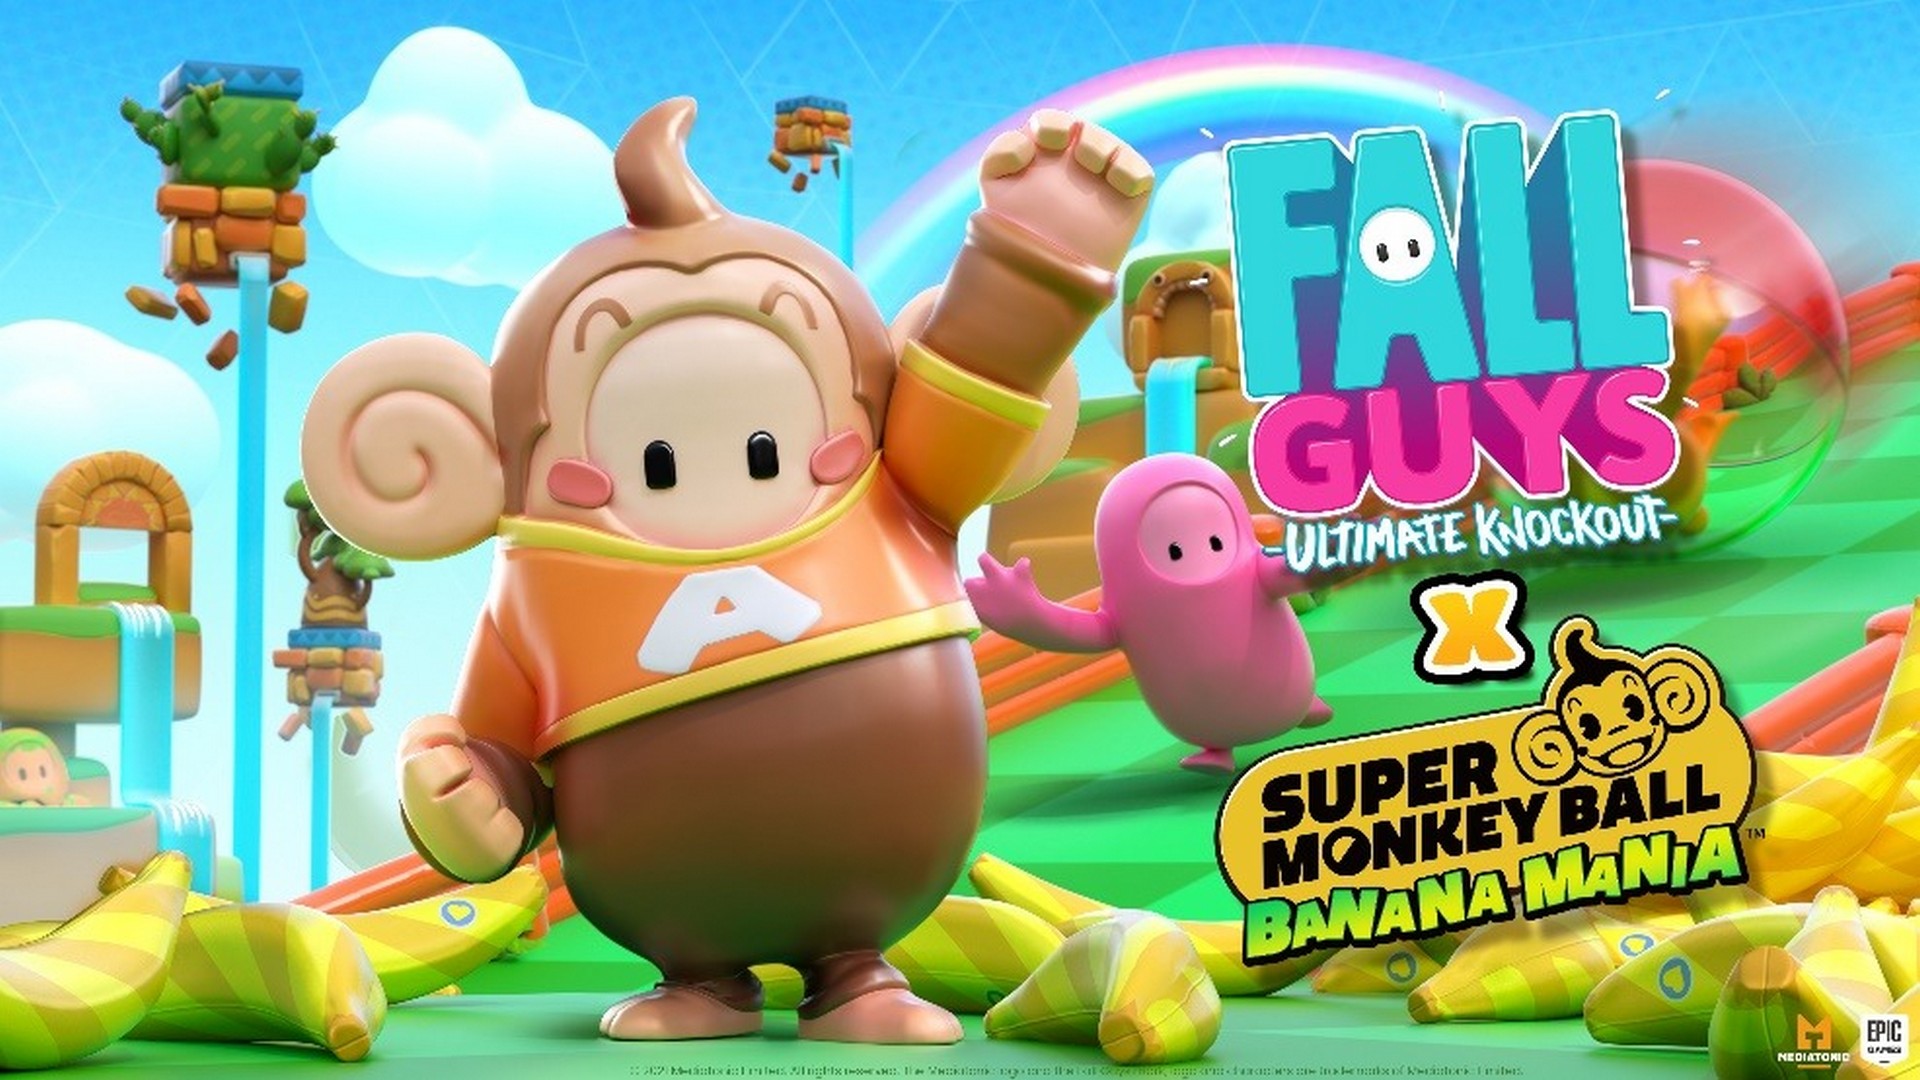 Super Monkey Ball Banana Mania x Fall Guys: Ultimate Knockout – Entering The Jungle-Dom